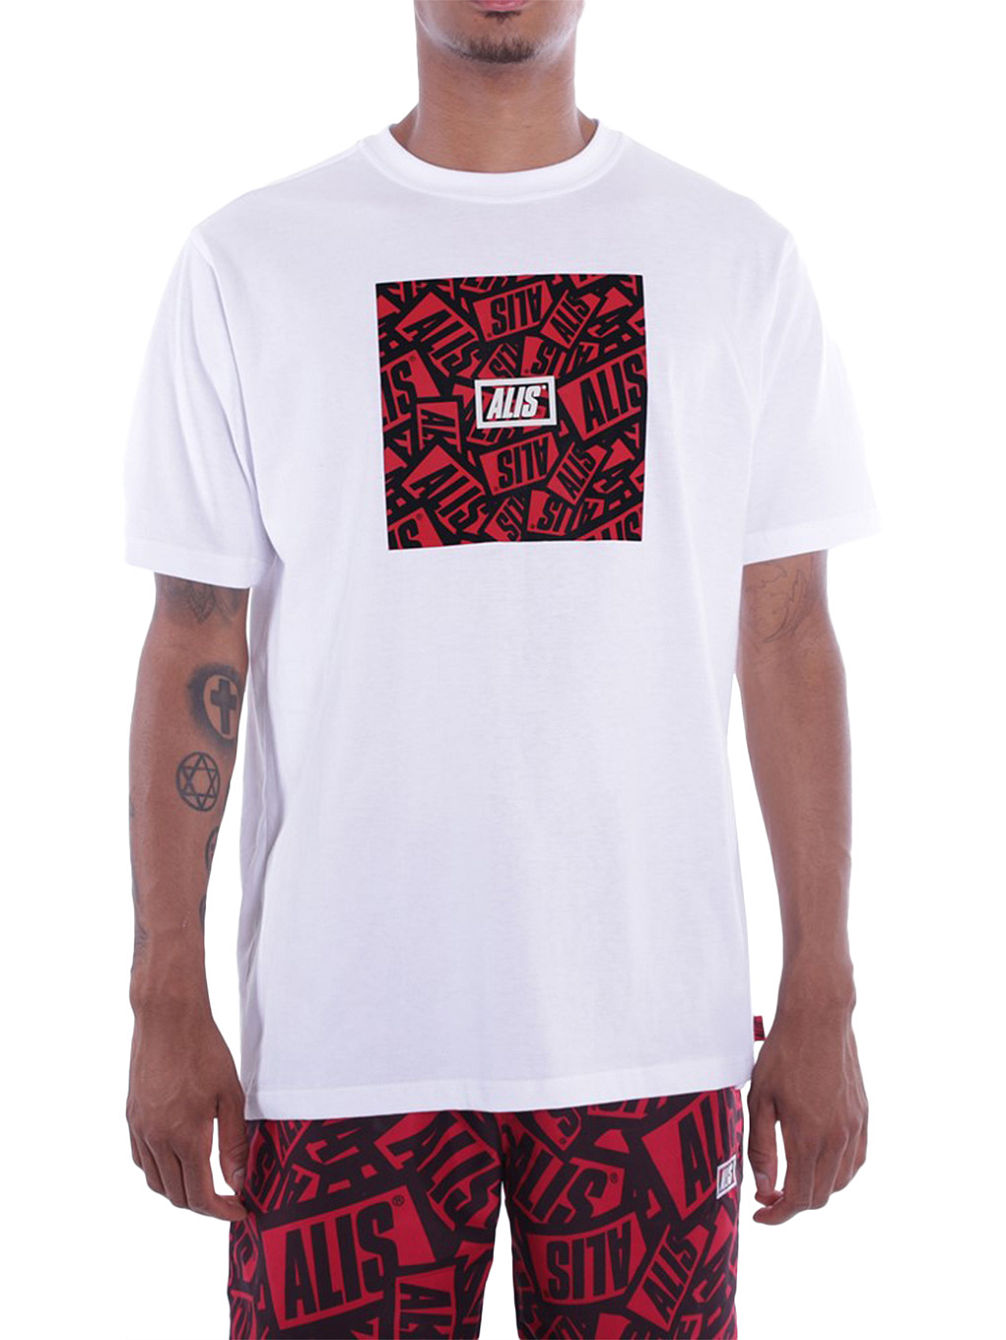 Sticker Game Square T-Shirt